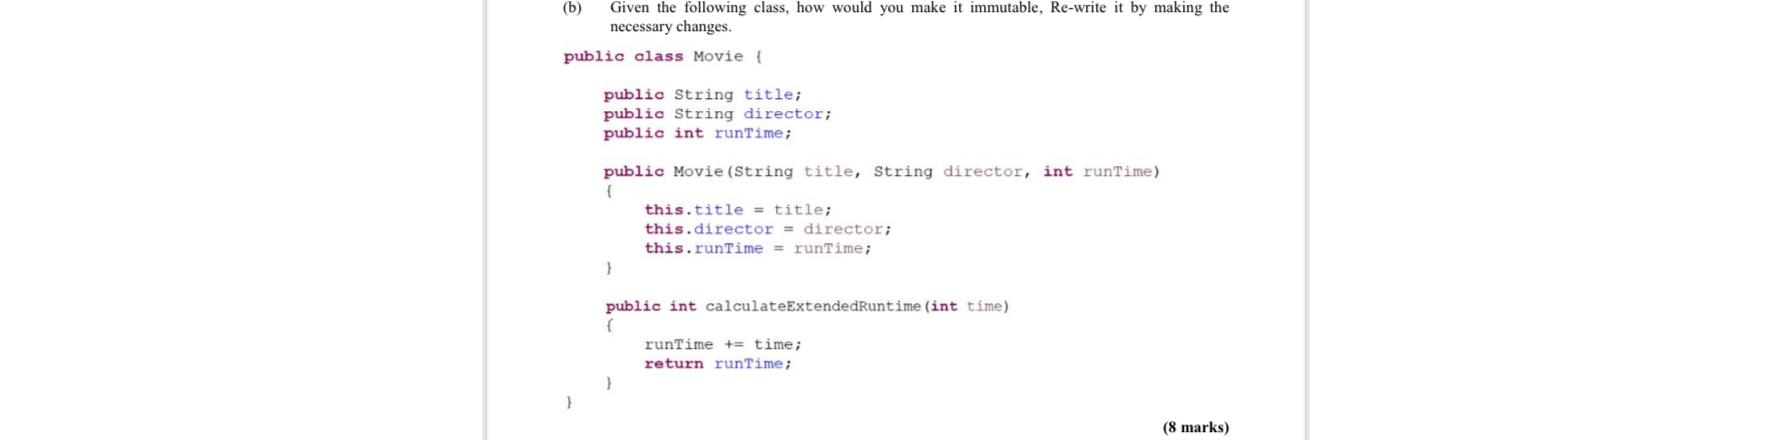 Given the following class, how would you make it immutable, Re-write it by making the necessary changes.